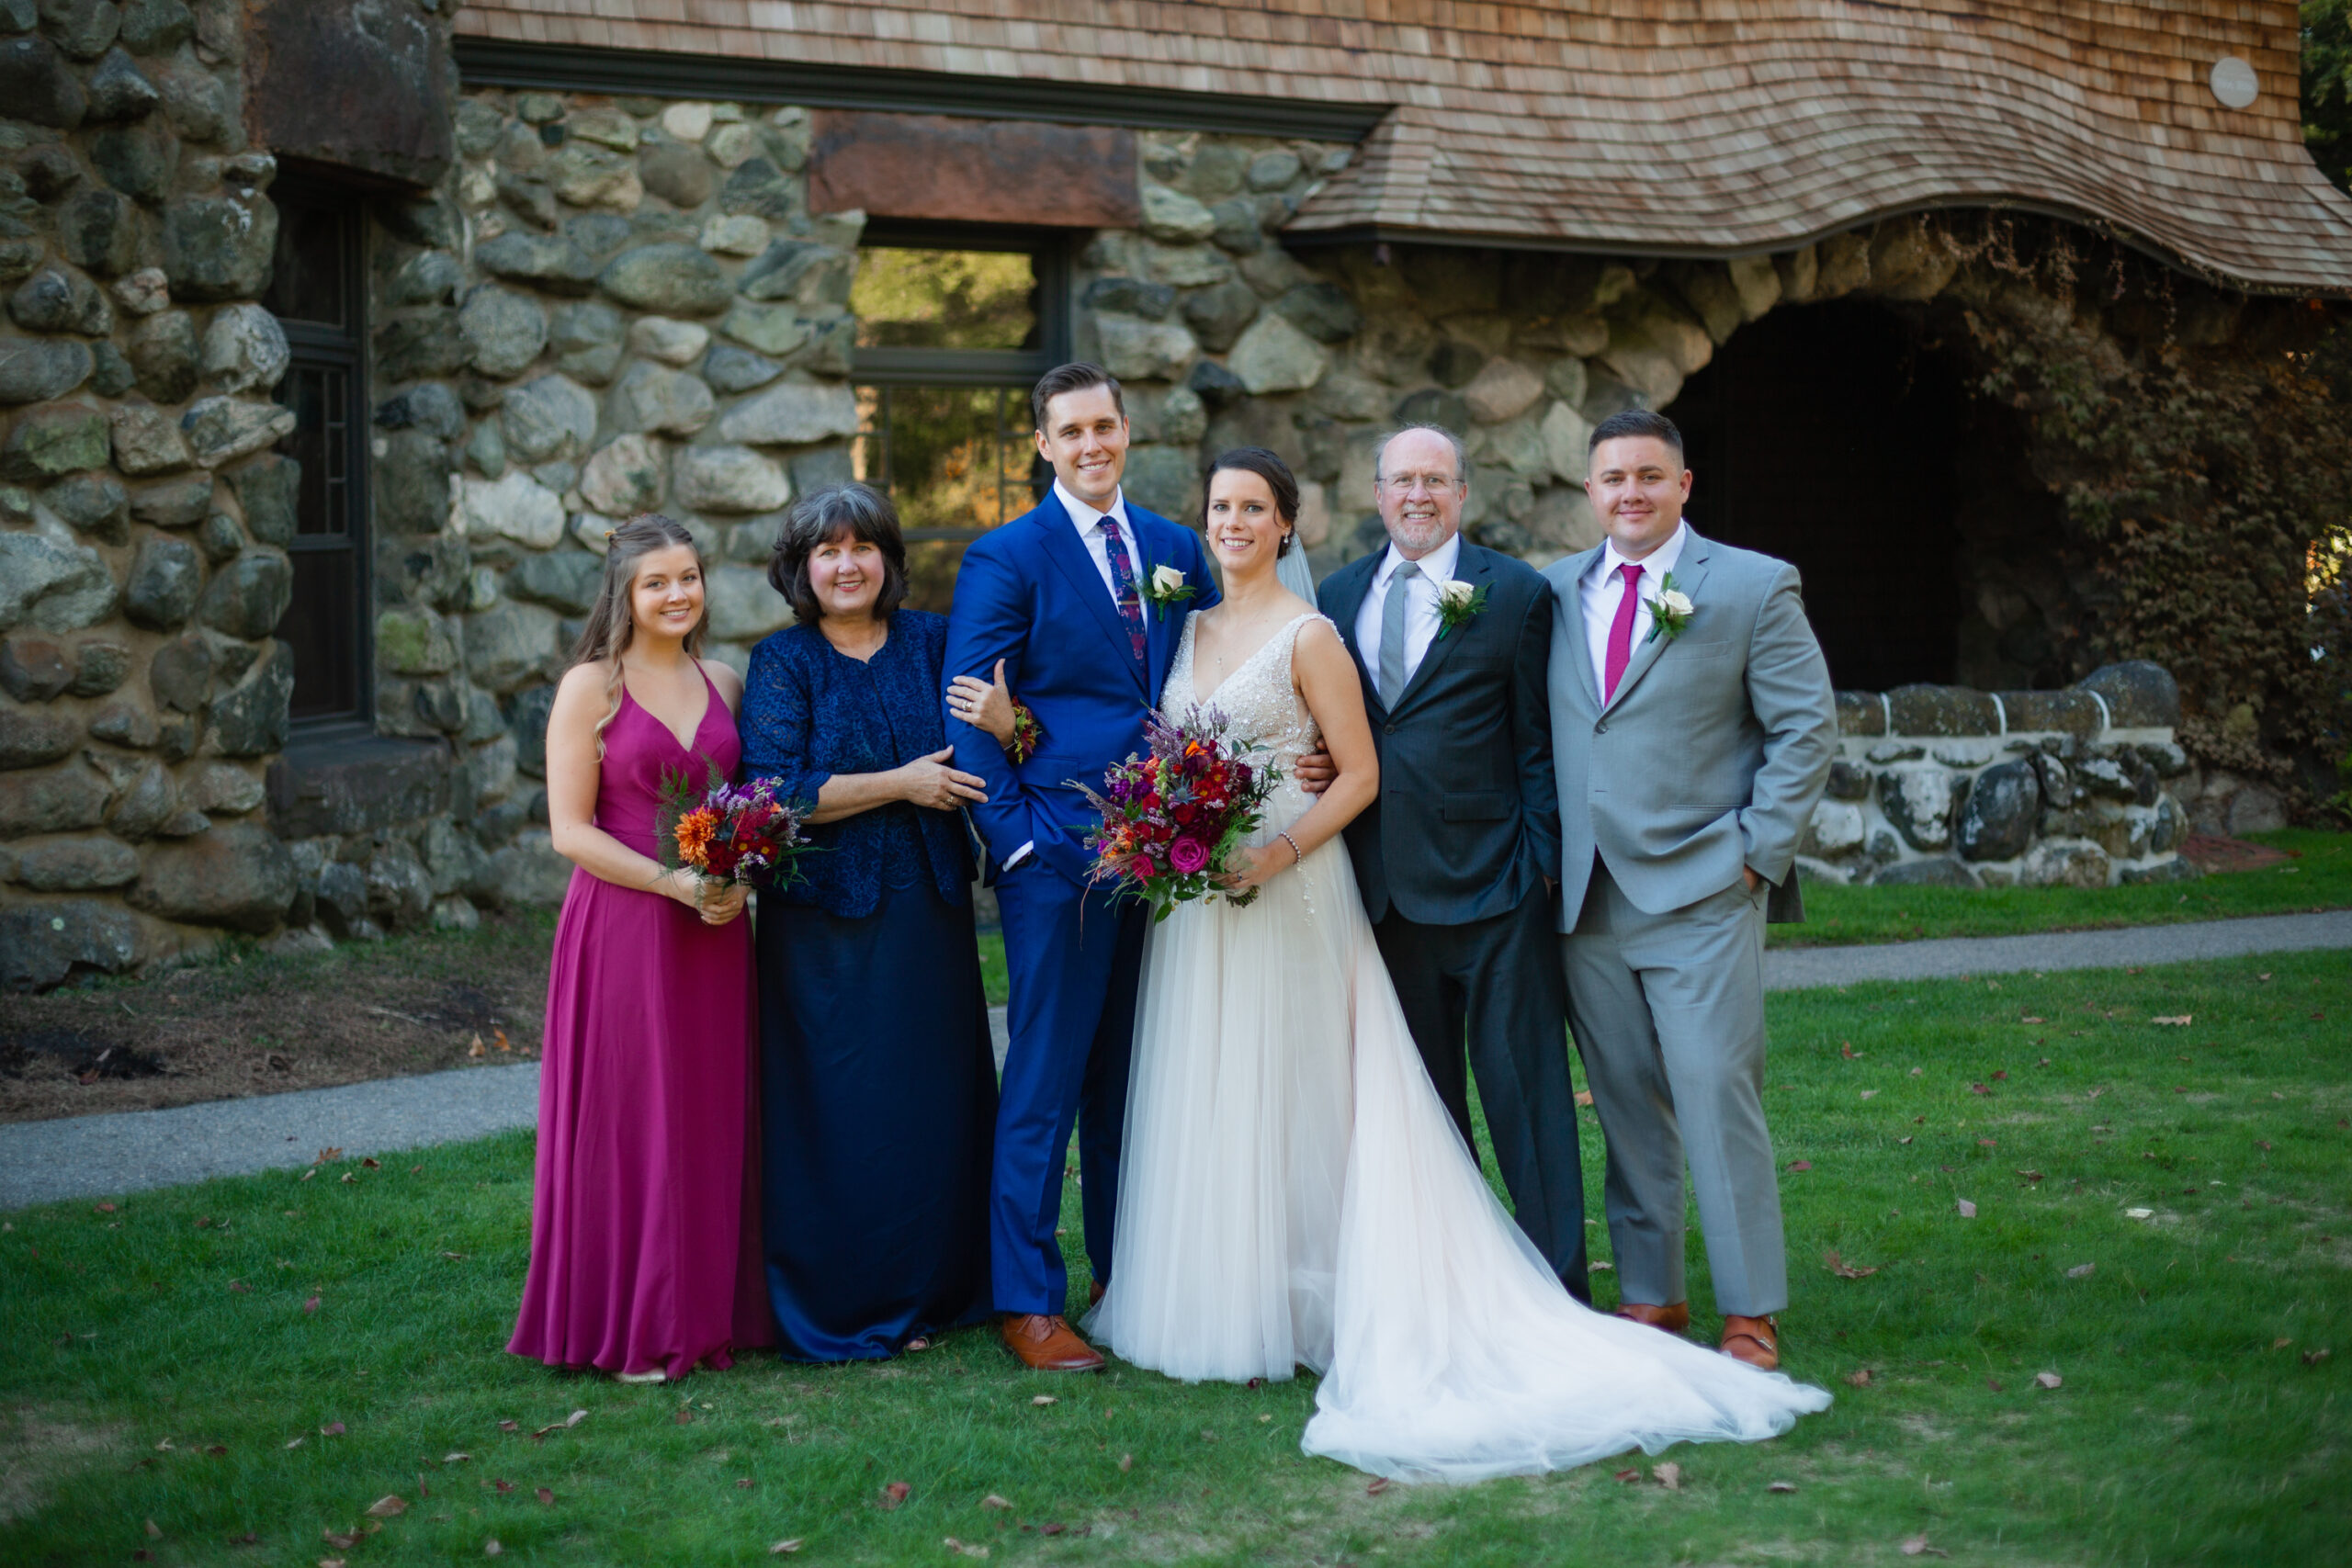 family photo on the wedding day by chiha studios